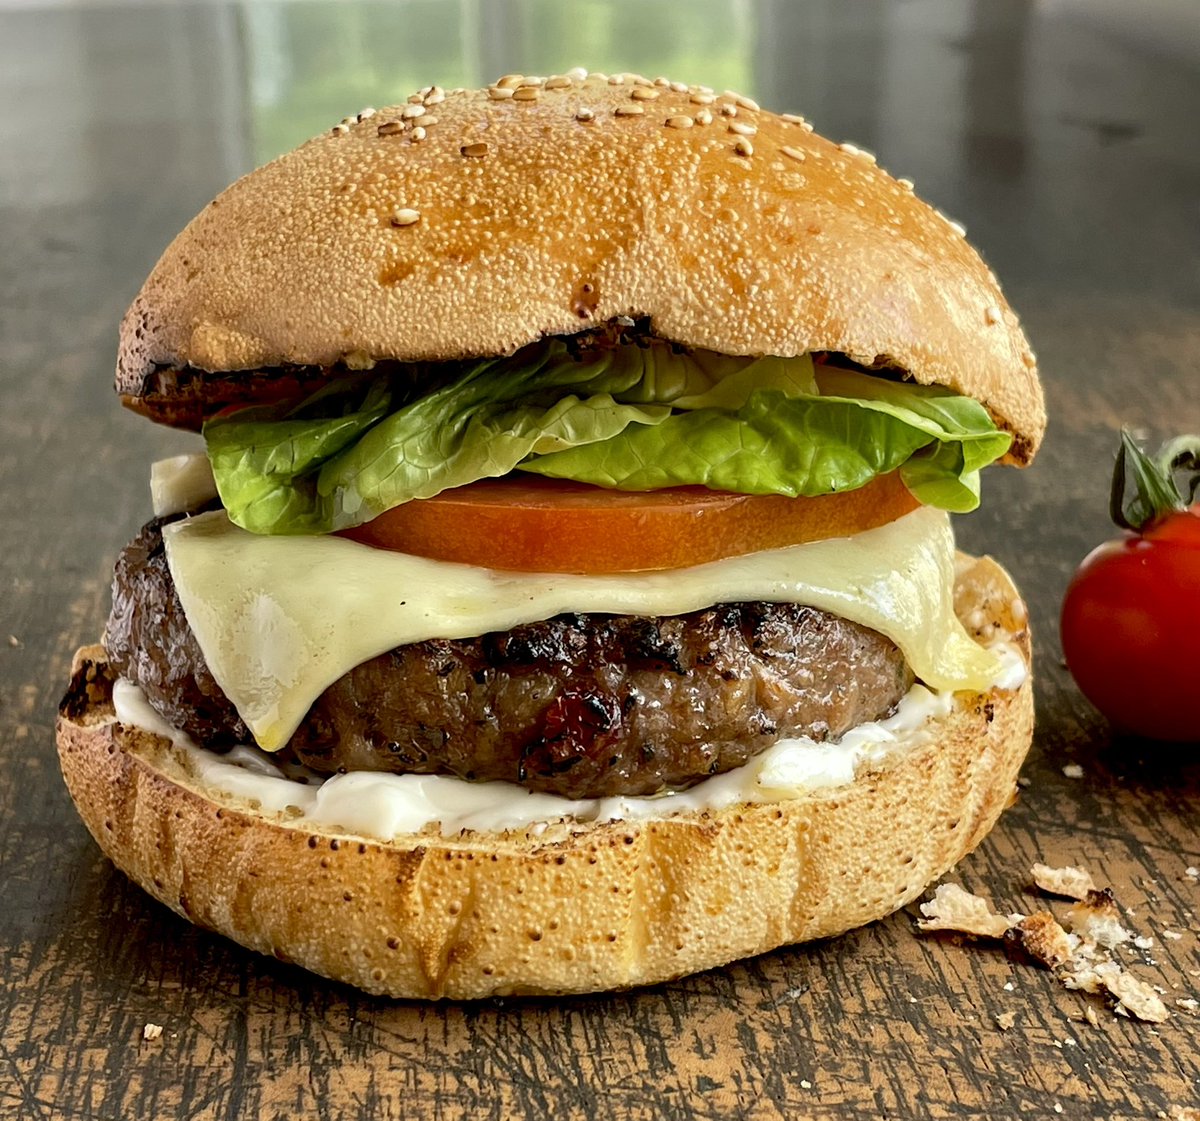 Our new luxury Manx Loaghtan burger is available at Robinson’s & the Good Health Store, we’ve sold out at the farm shop. 90% Loaghtan meat, fresh red onion & cherry tomatoes dehydrated on the farm, basil. Absolutely delicious #manxloaghtan #BestBurgers #localproduce #isleofman